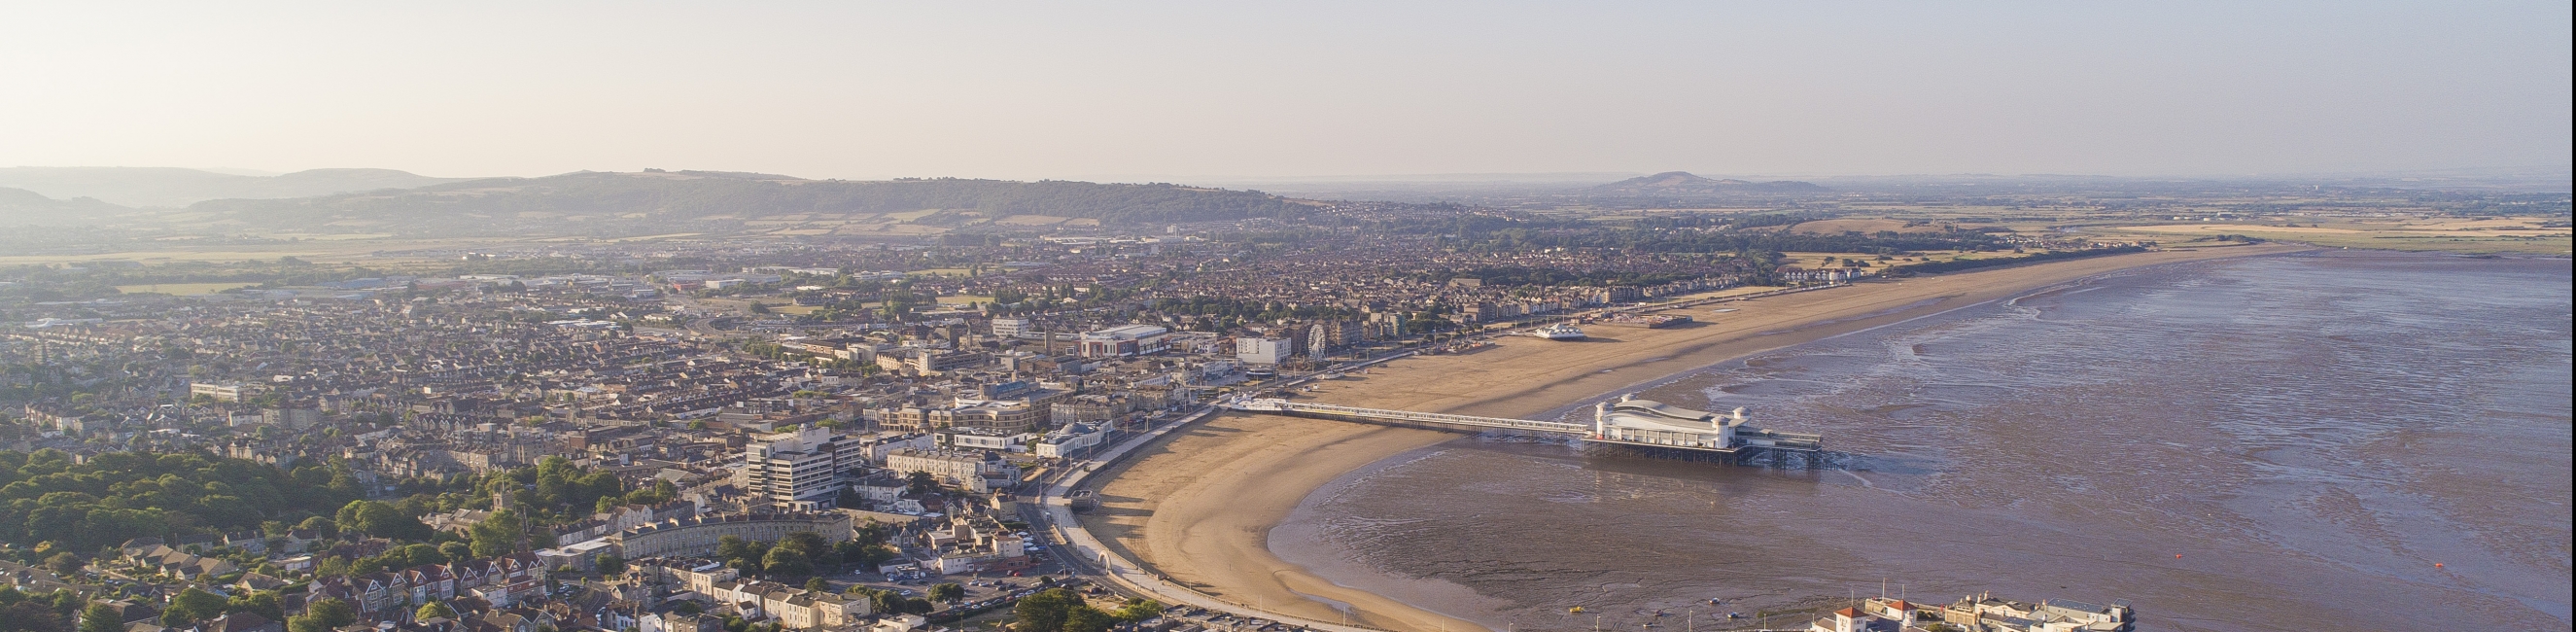 busses buss passes in weston-super-mare how to get to weston college from